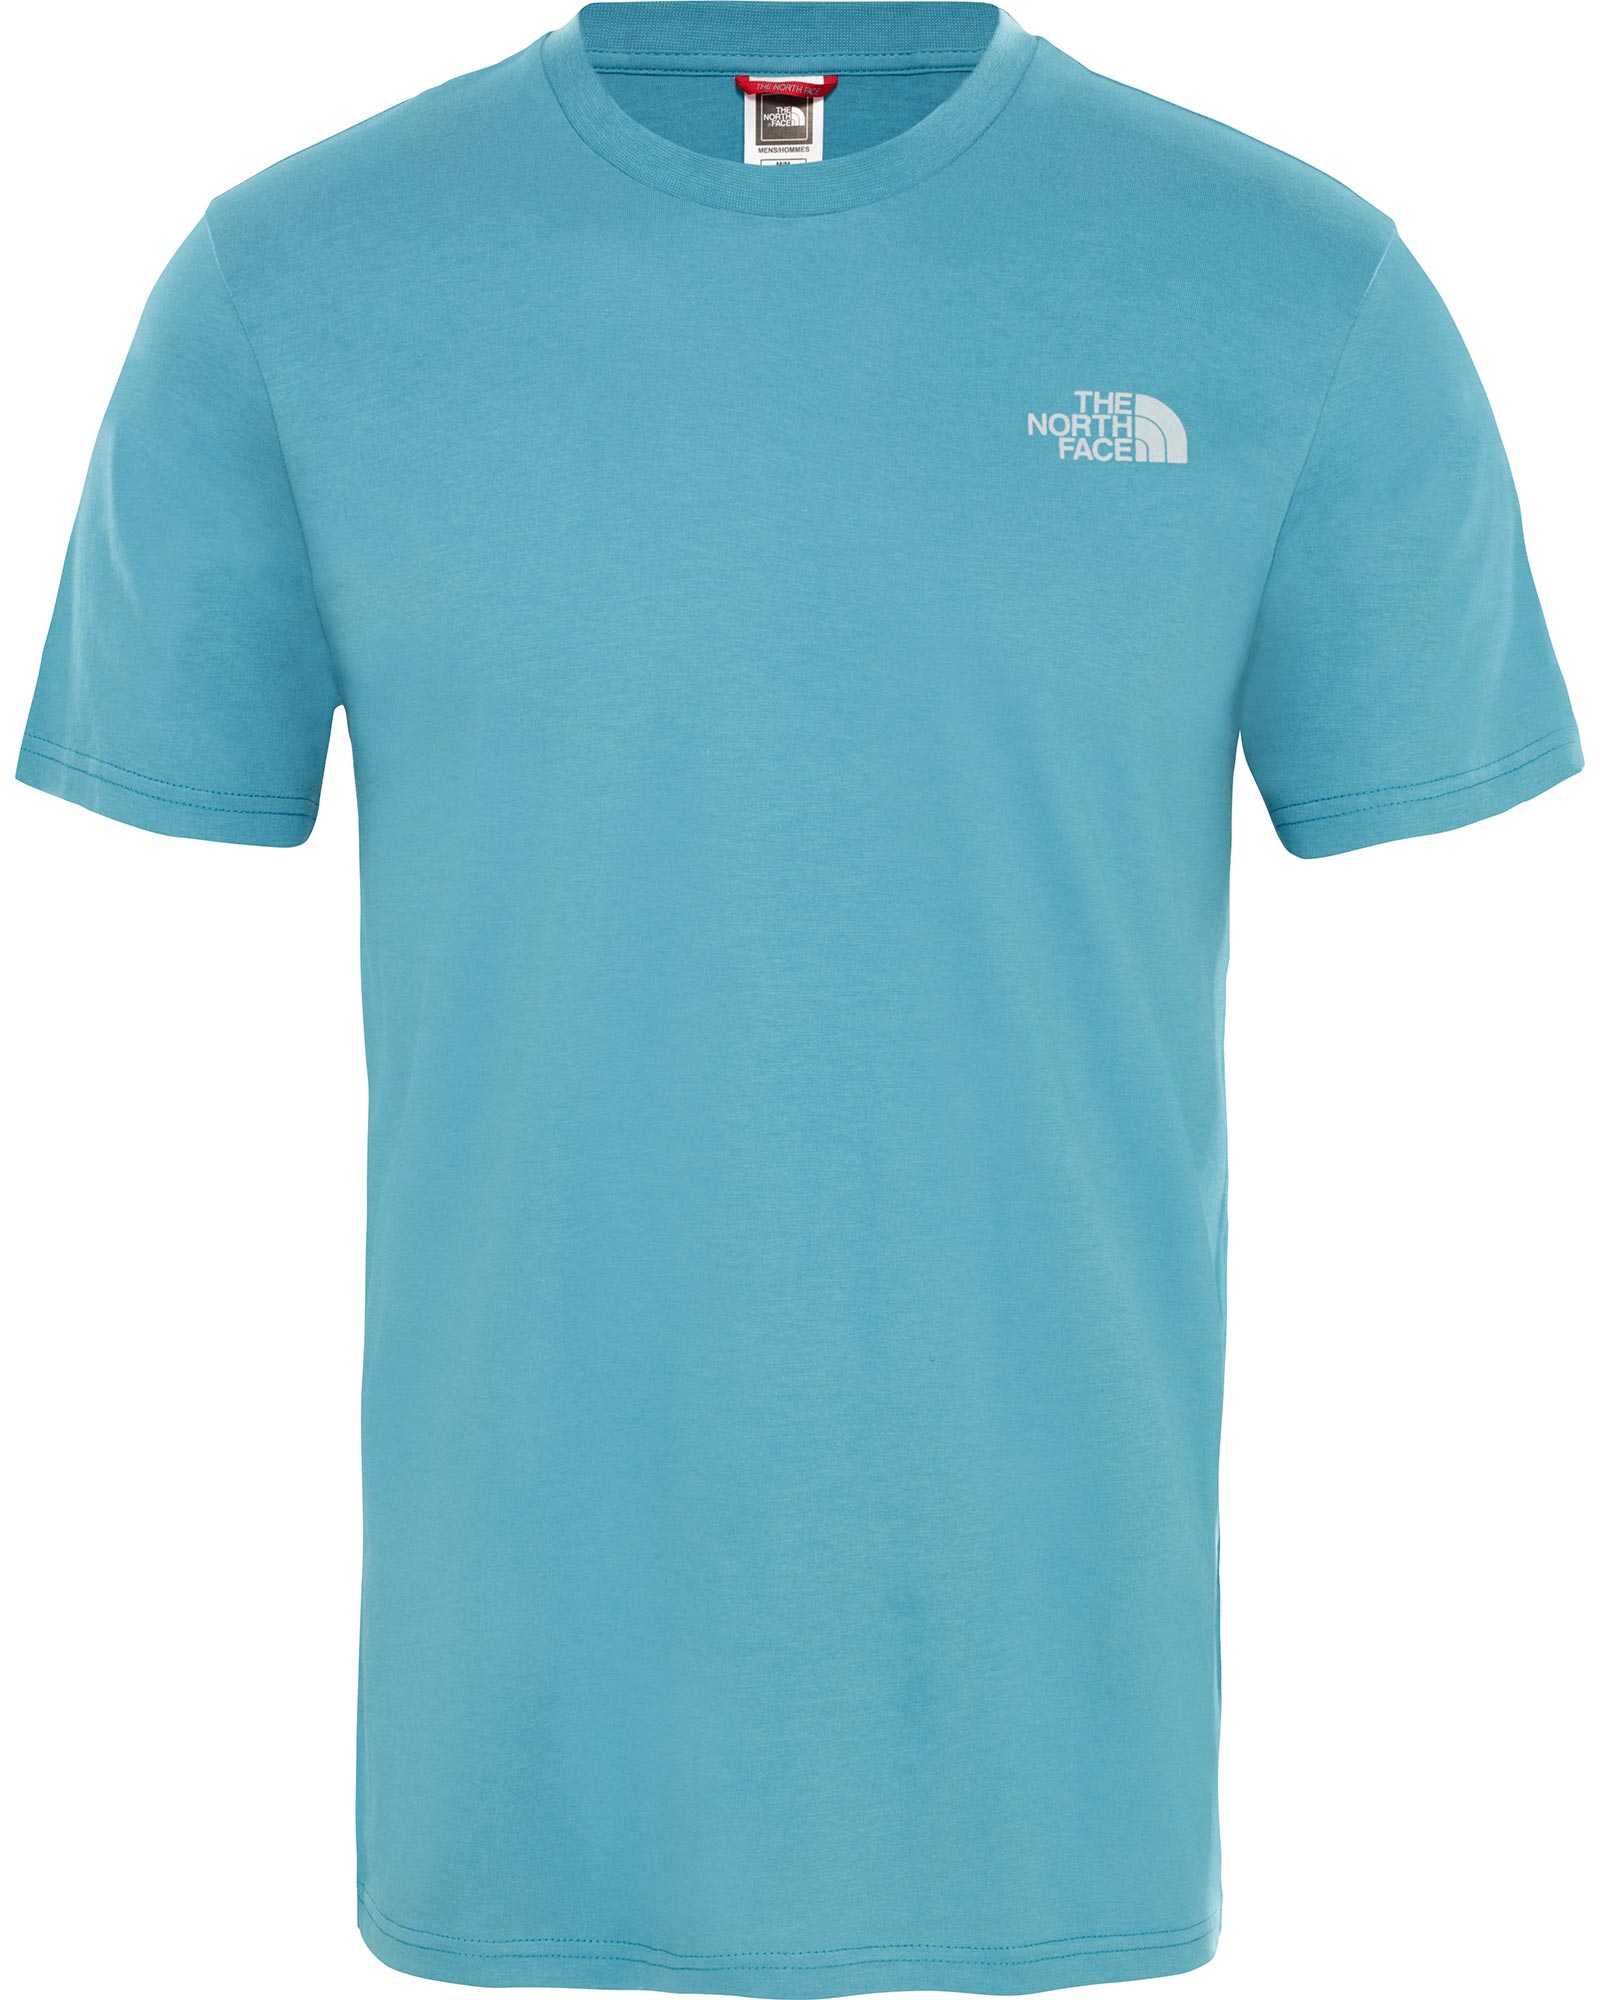 The North Face Simple Dome Men’s T Shirt - Storm Blue S